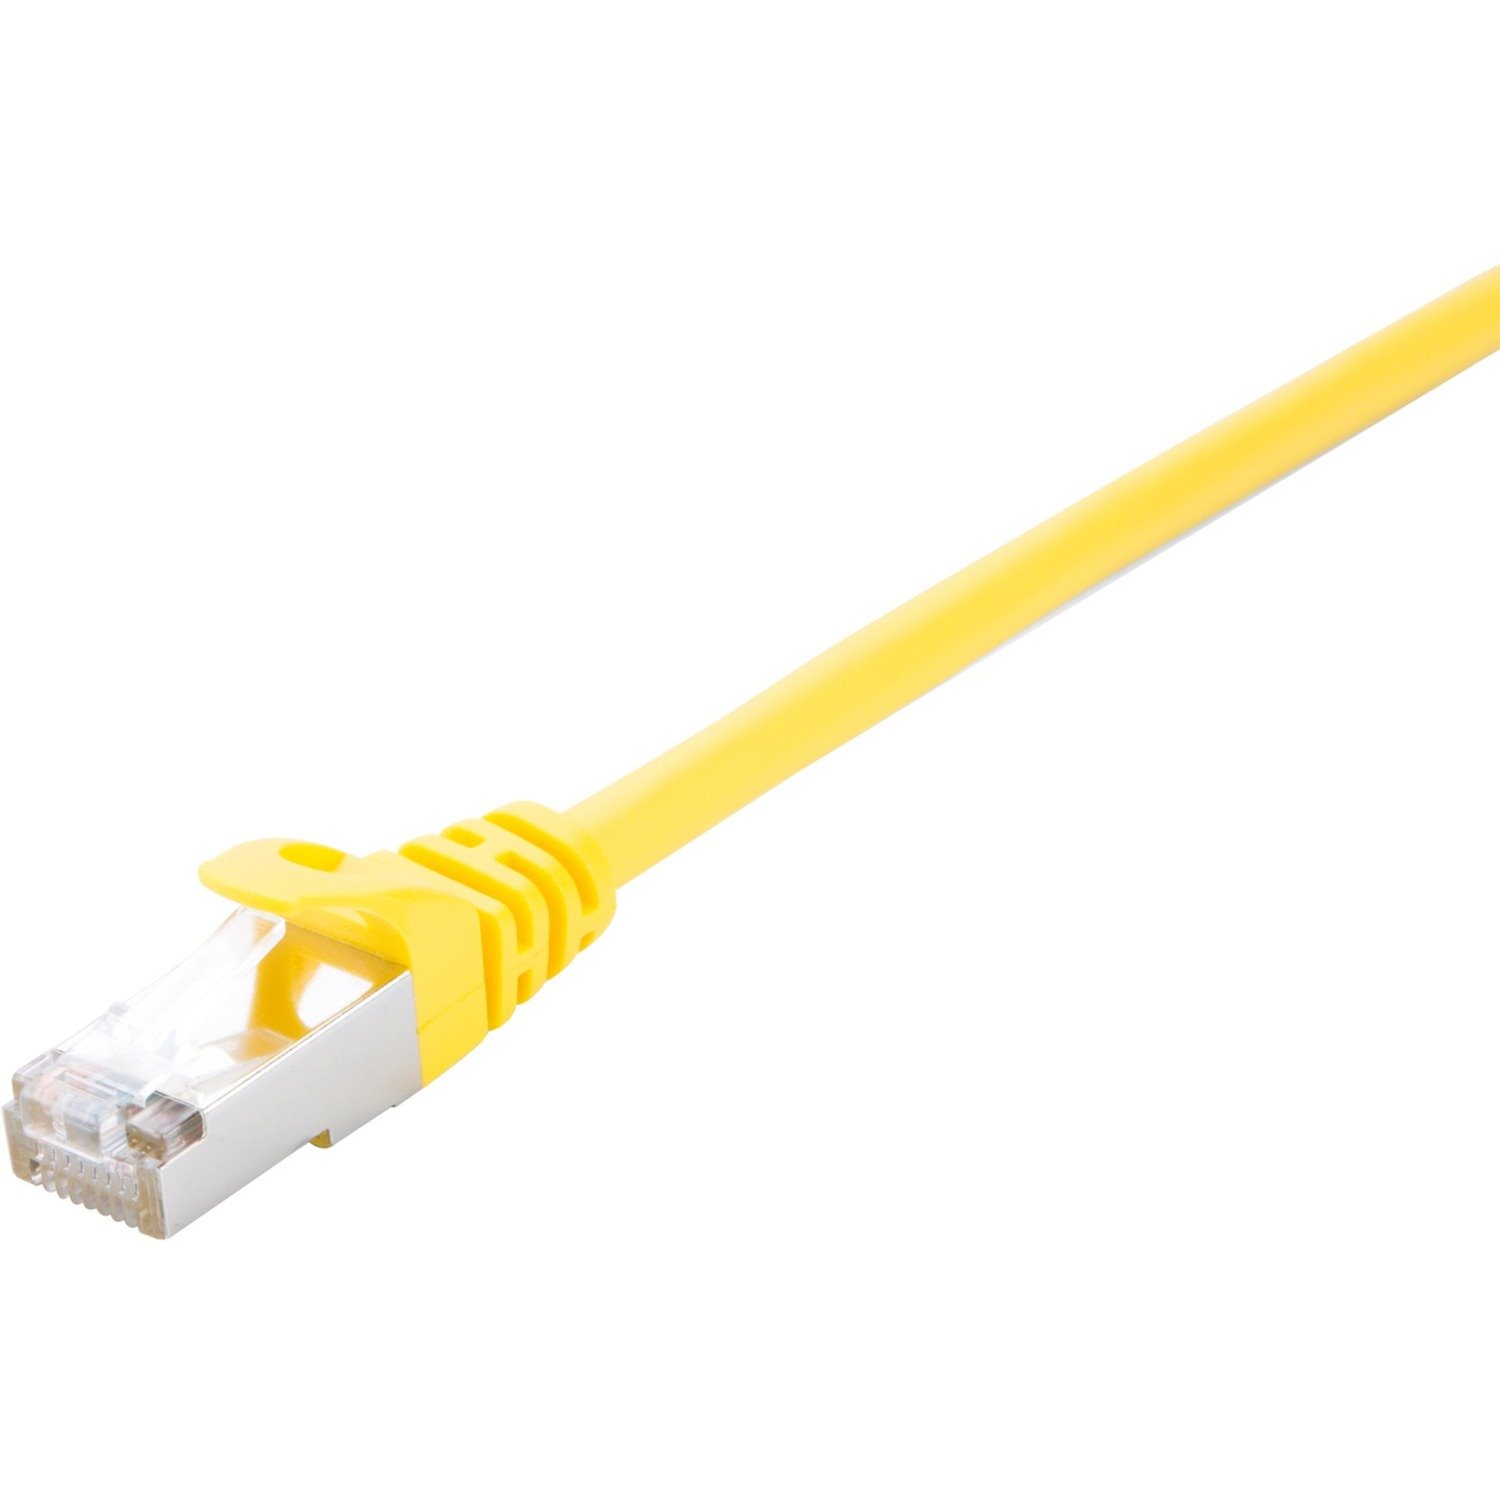 V7 V7CAT6STP-01M-YLW-1E 1 m Category 6 Network Cable for Modem, Patch Panel, Network Card